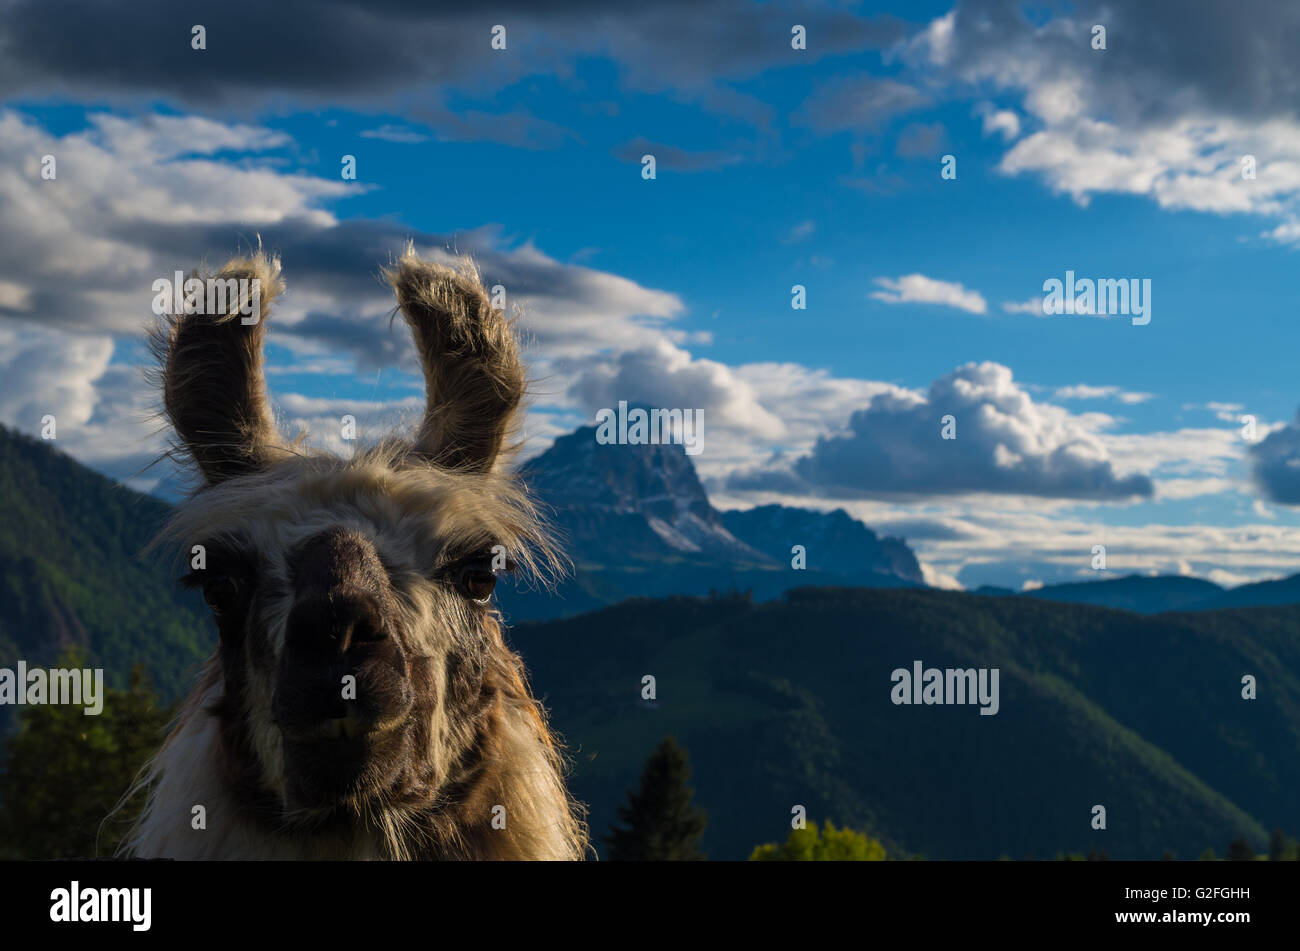 Lama in front of a mountain, dolomites, southtyrol, italy Stock Photo